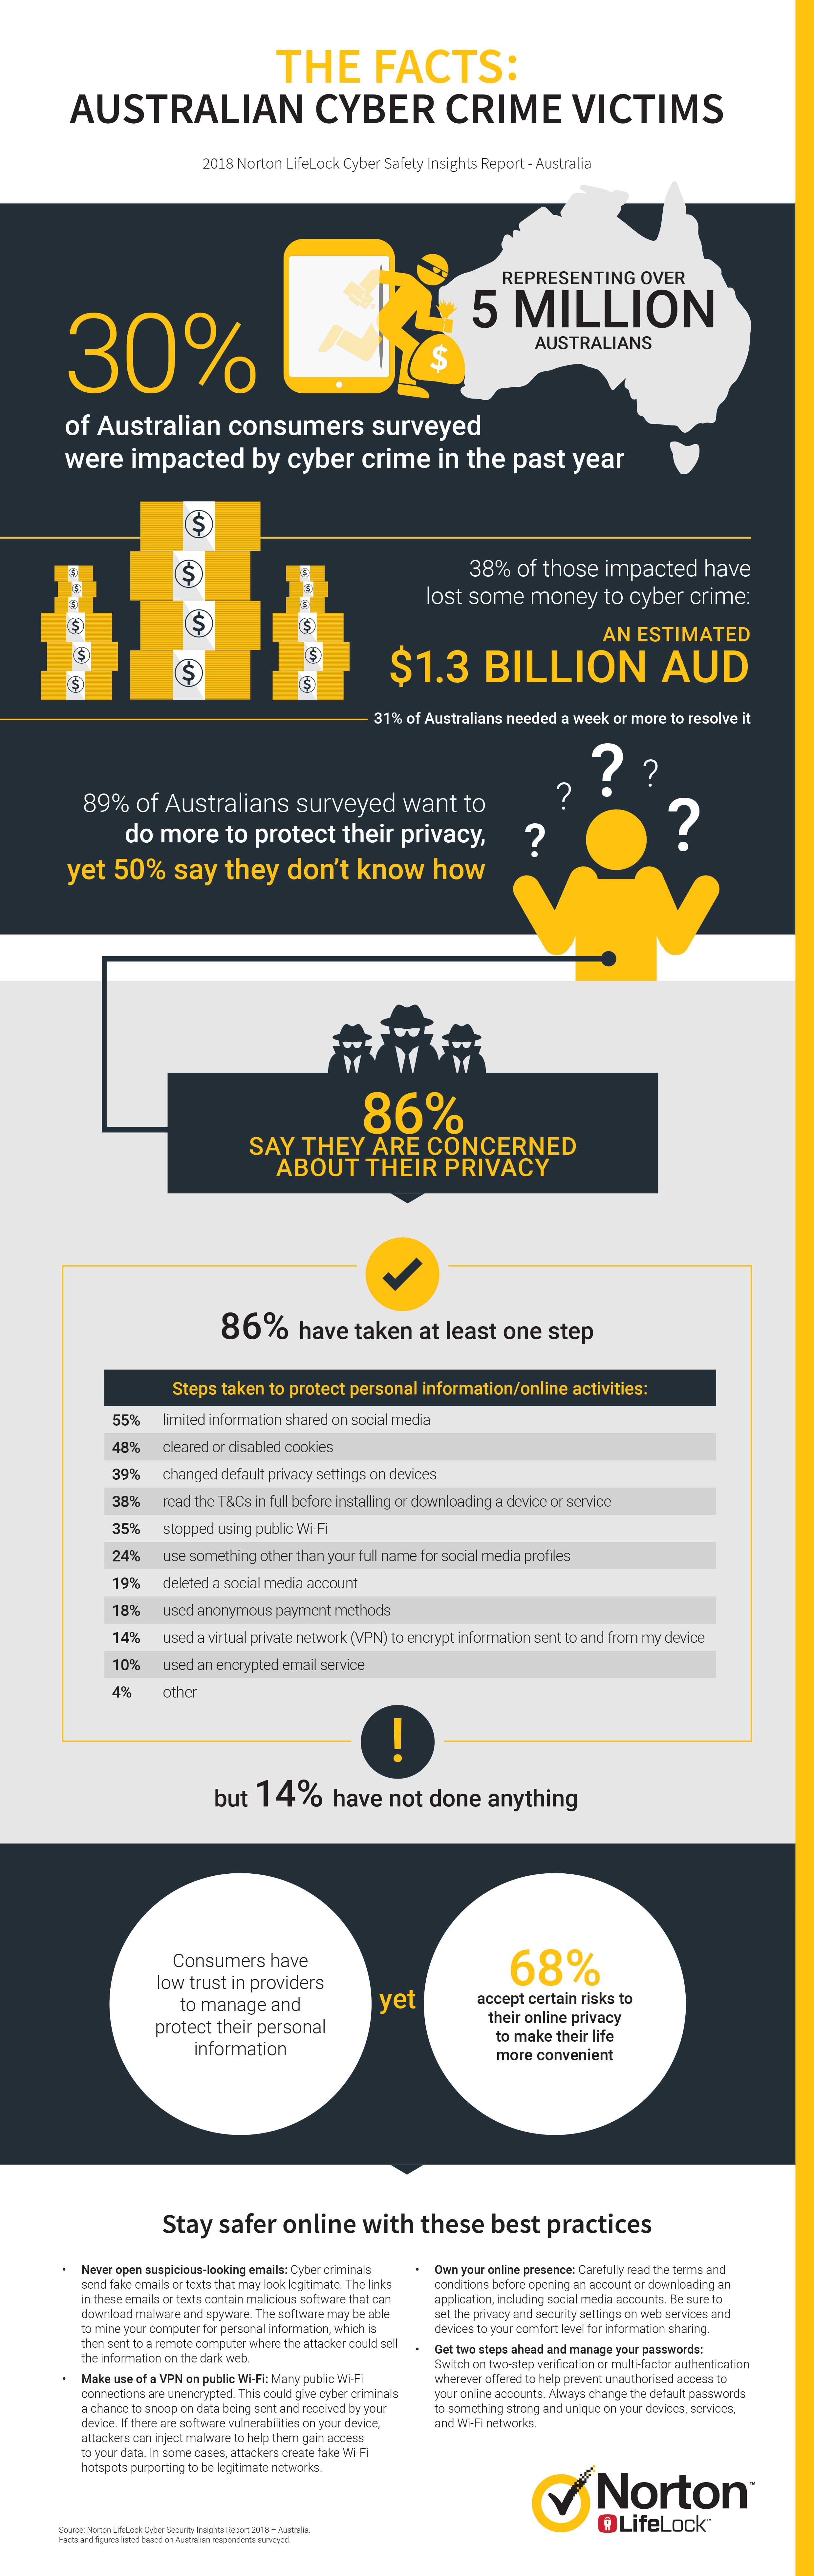 2018 norton lifelock cyber safety insights report infographic